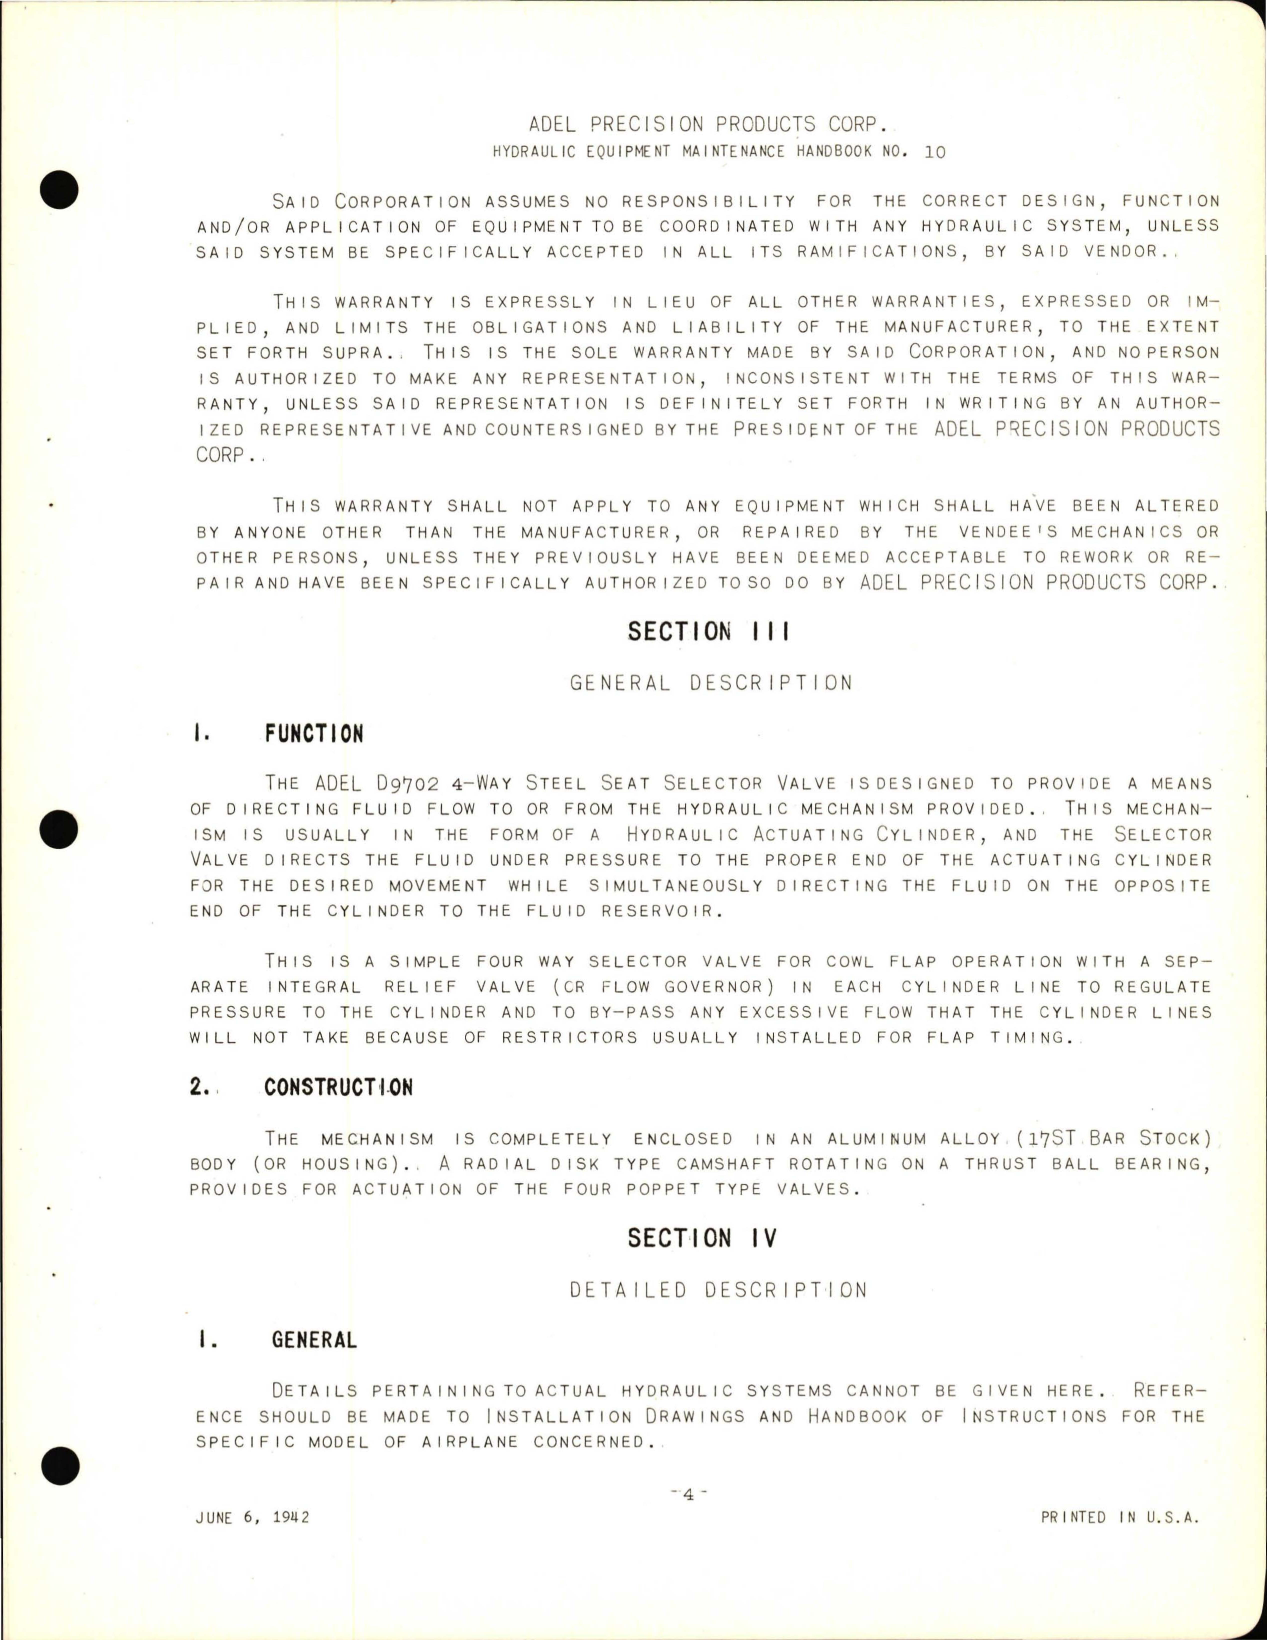 Sample page 9 from AirCorps Library document: Instructions with Parts Catalog for Cowl Flap Valve - D9702